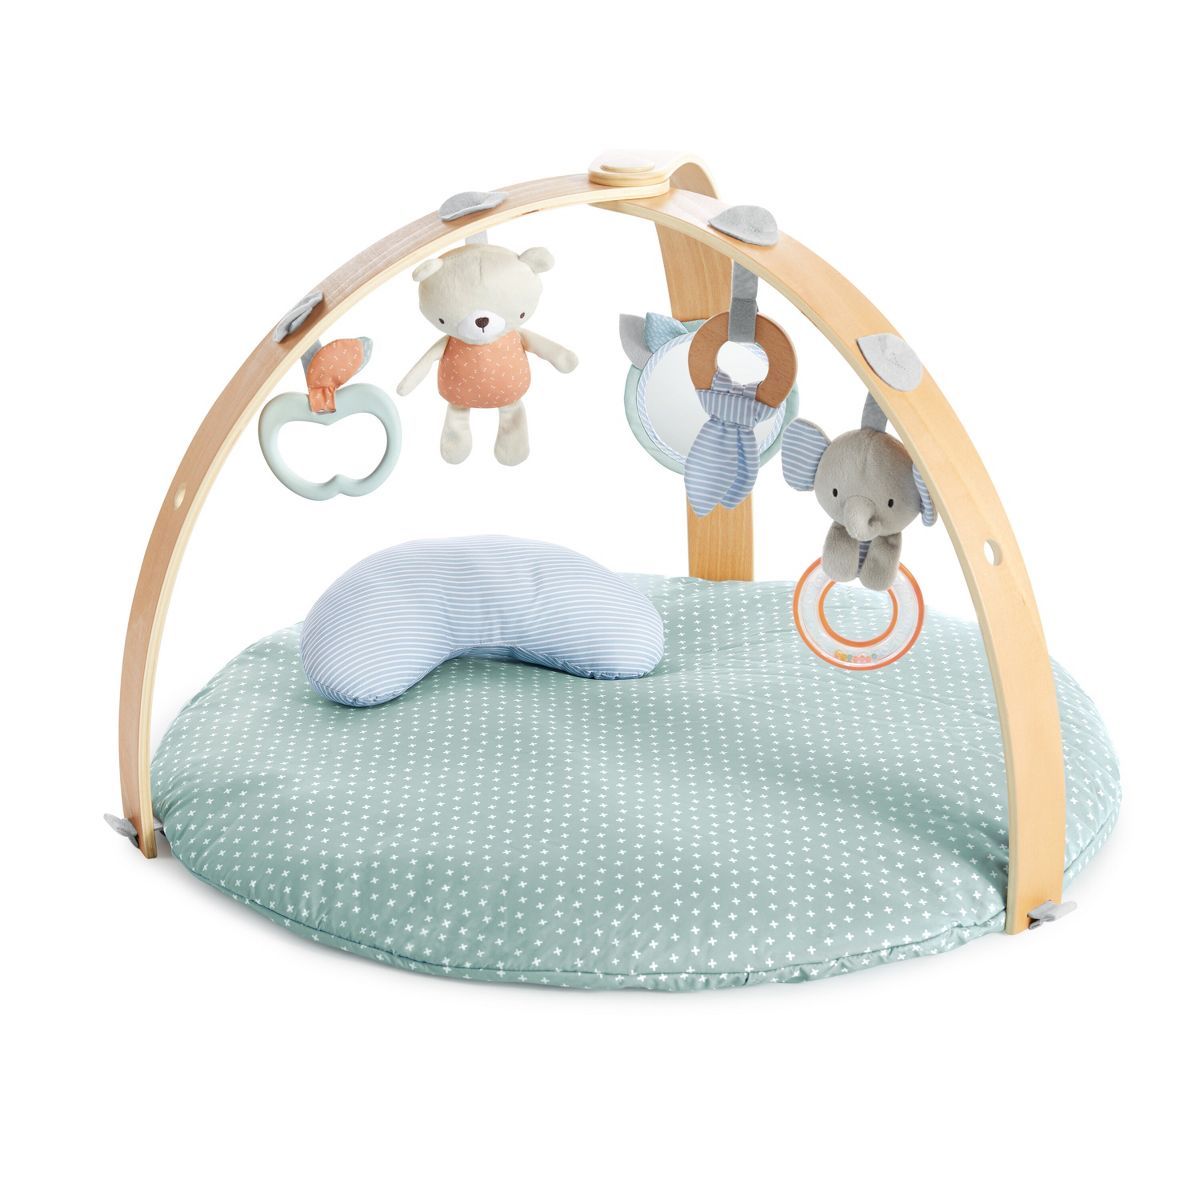 Ingenuity Cozy Spot Reversible Duvet Activity Gym with Wooden Toy Bar | Target